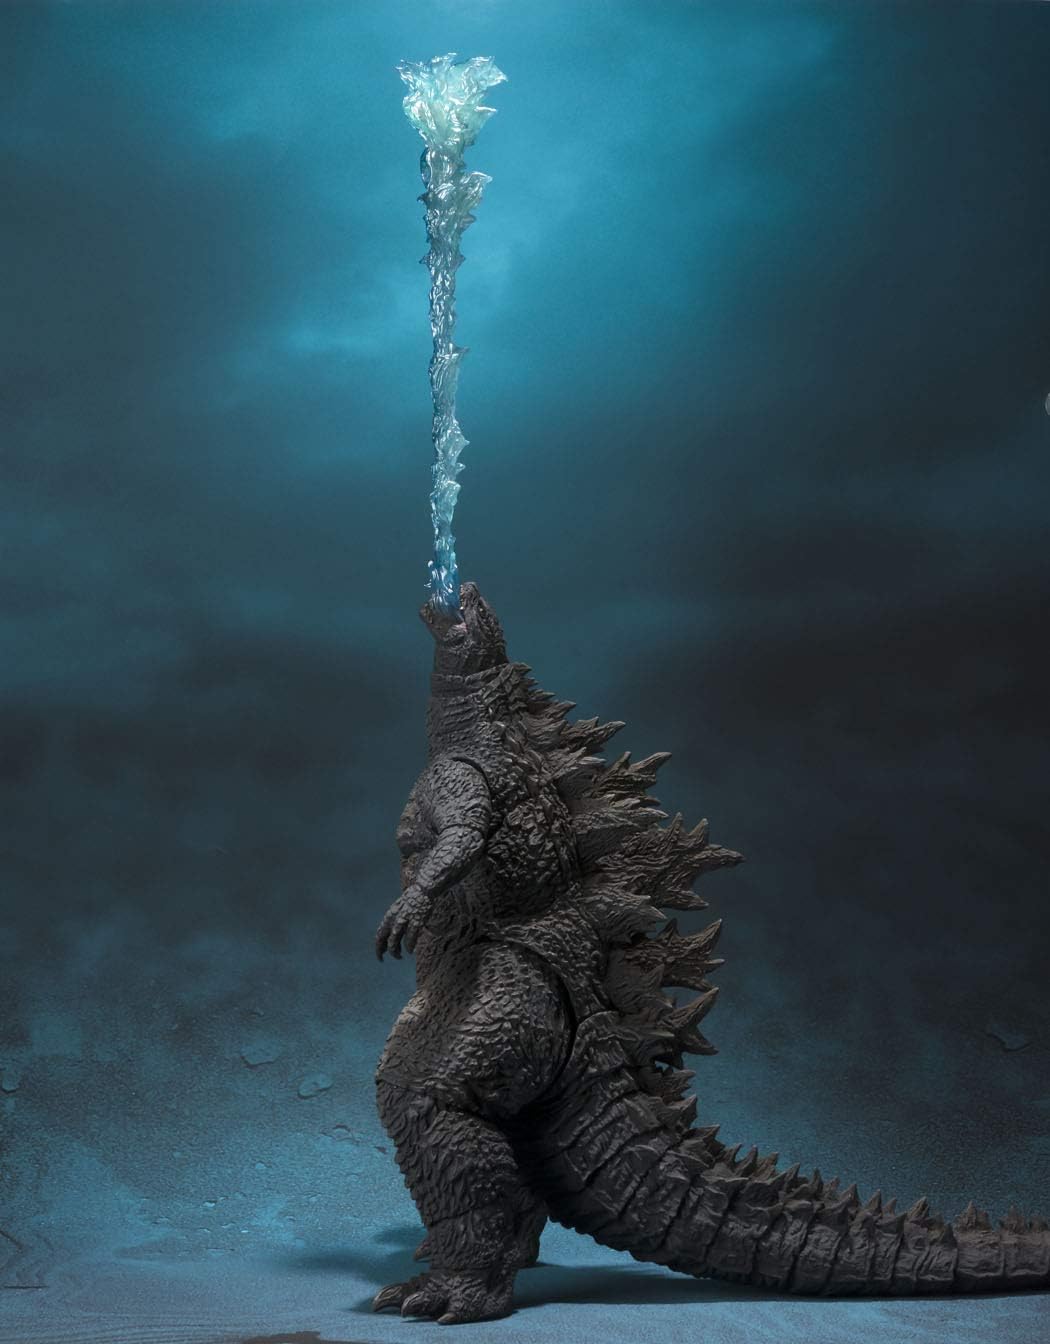 Godzilla King of the Monsters (2019) S.H. Monster Arts action figure